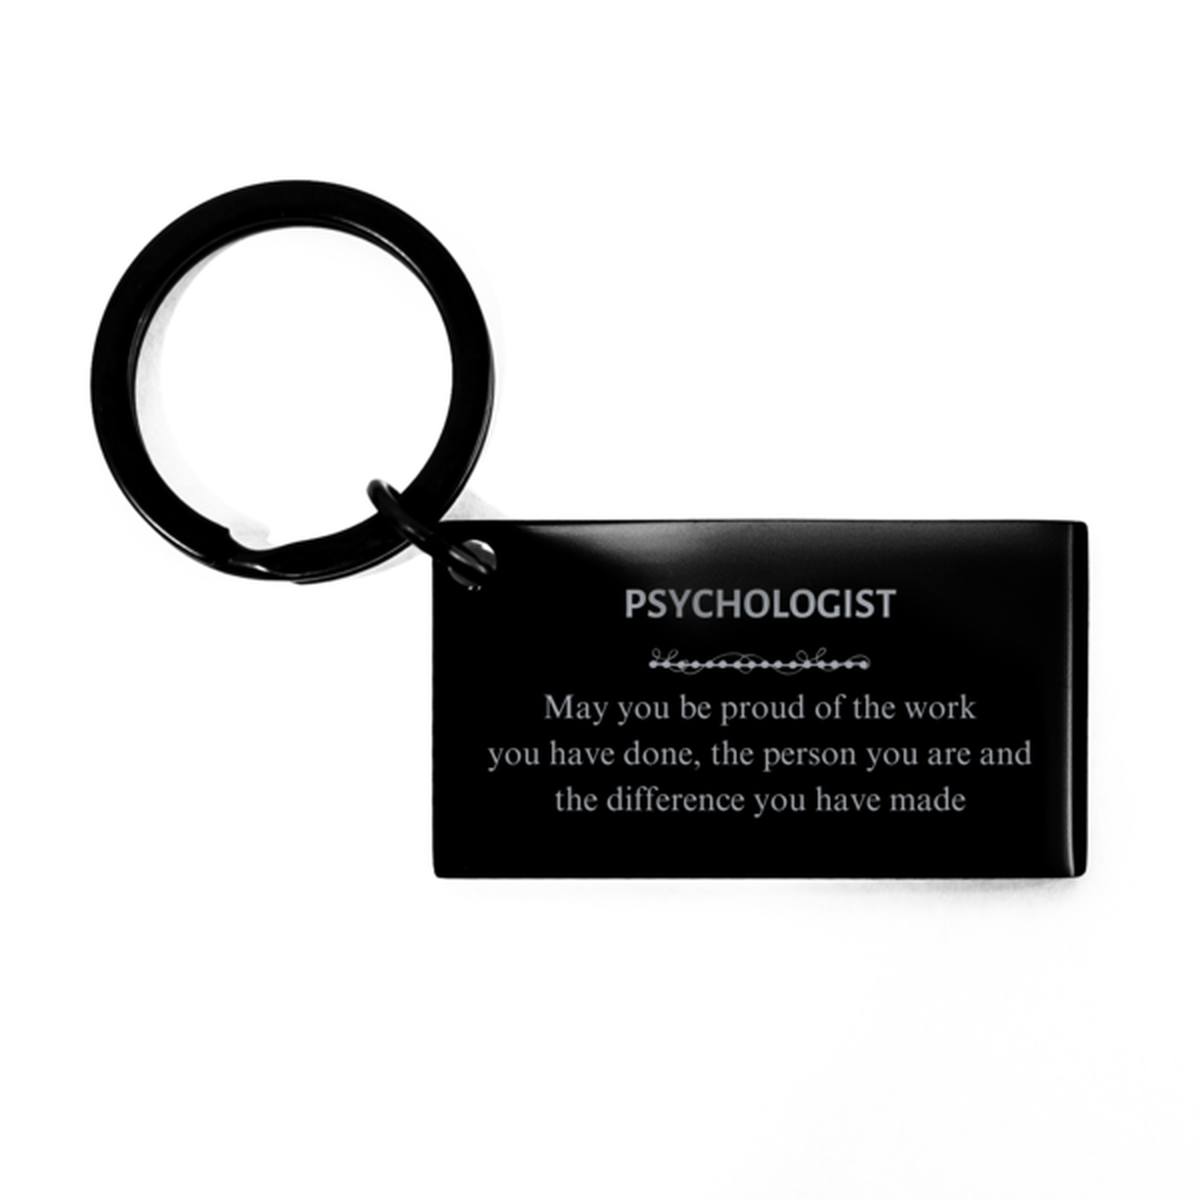 Streetcar Operator May you be proud of the work you have done, Retirement Psychologist Keychain for Colleague Appreciation Gifts Amazing for Psychologist